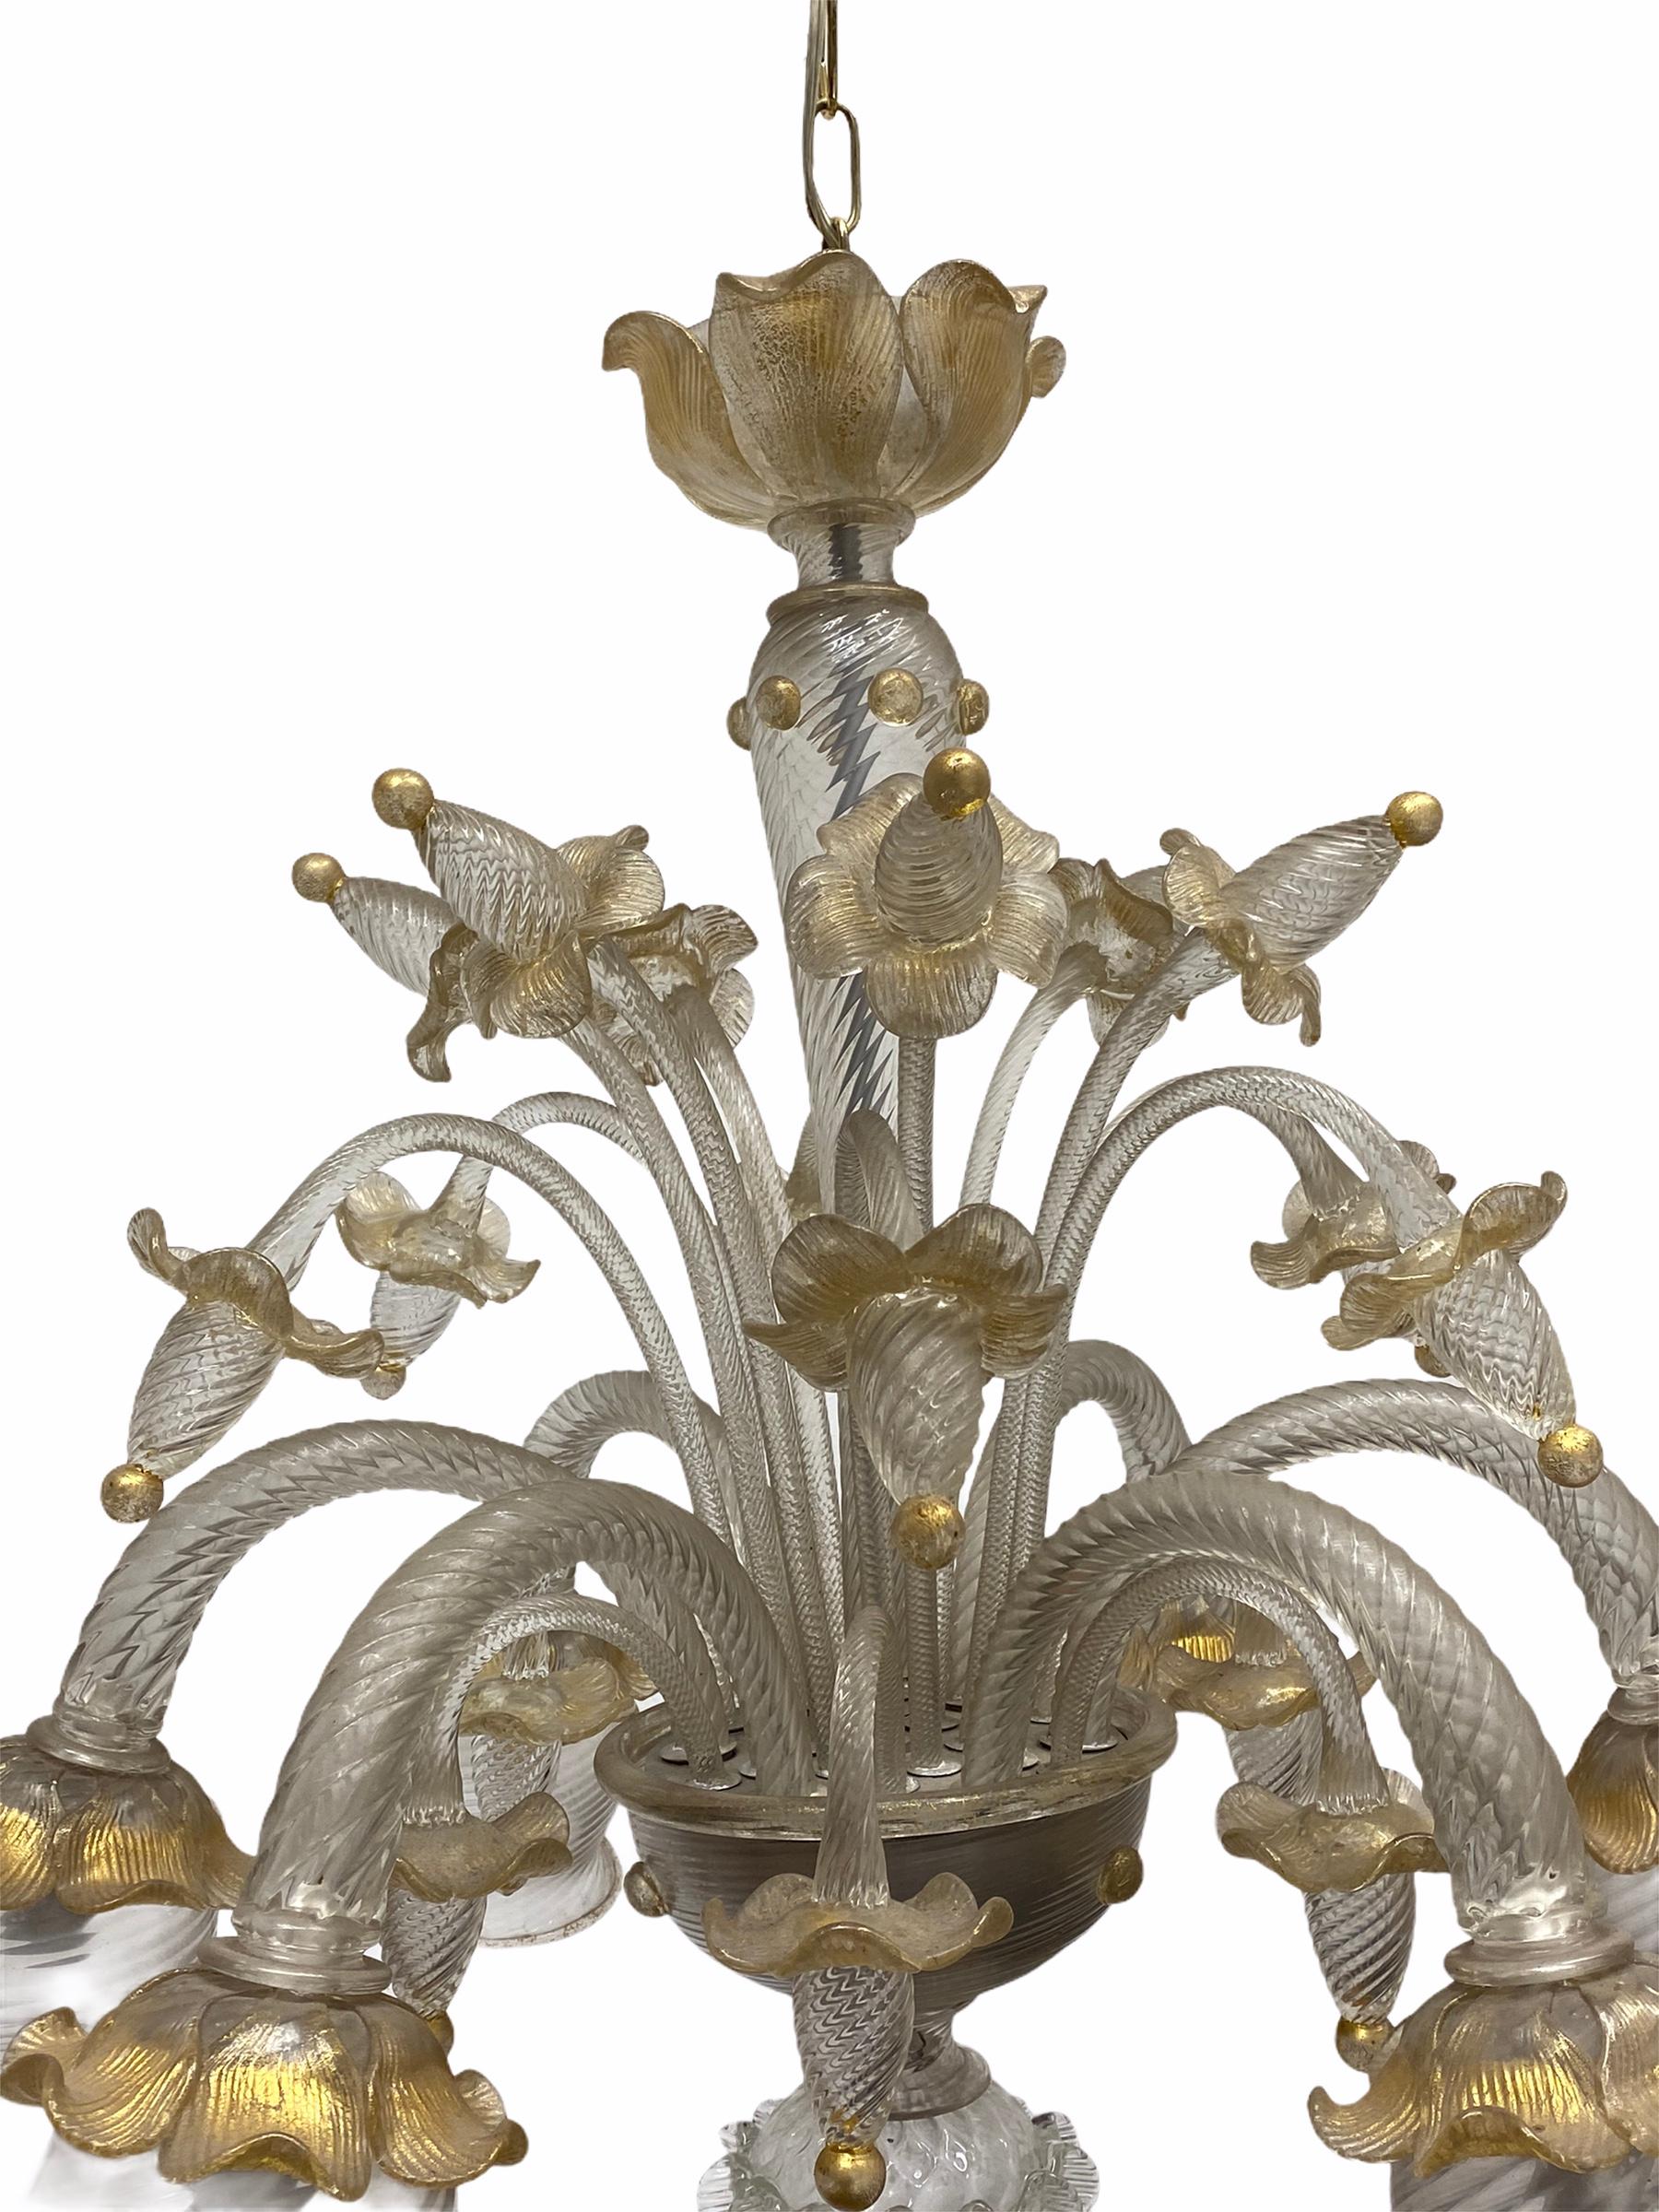 Stunning Gold Dusted Murano Chandelier, by Barovier Toso Murano, Italy, 1960s For Sale 4